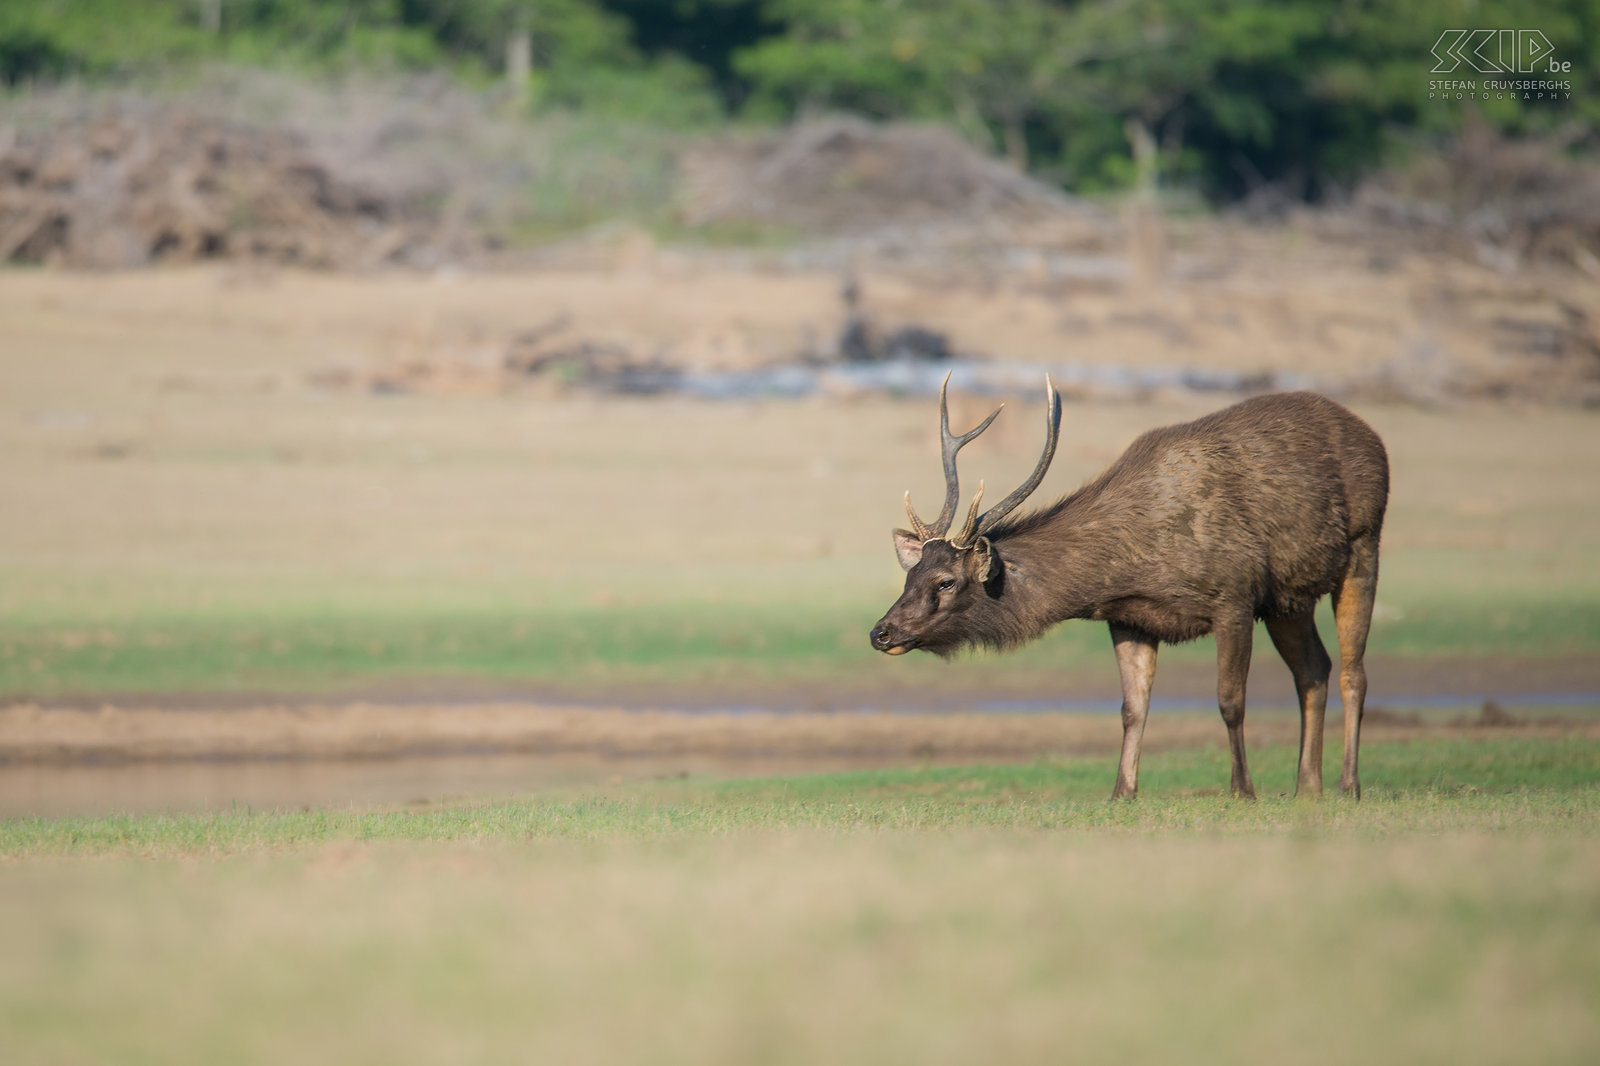 Kabini - Sambar deer The sambar (Rusa unicolor) is a large deer native to the Indian subcontinent. Sambars are the favorite meal of a tiger.  Stefan Cruysberghs